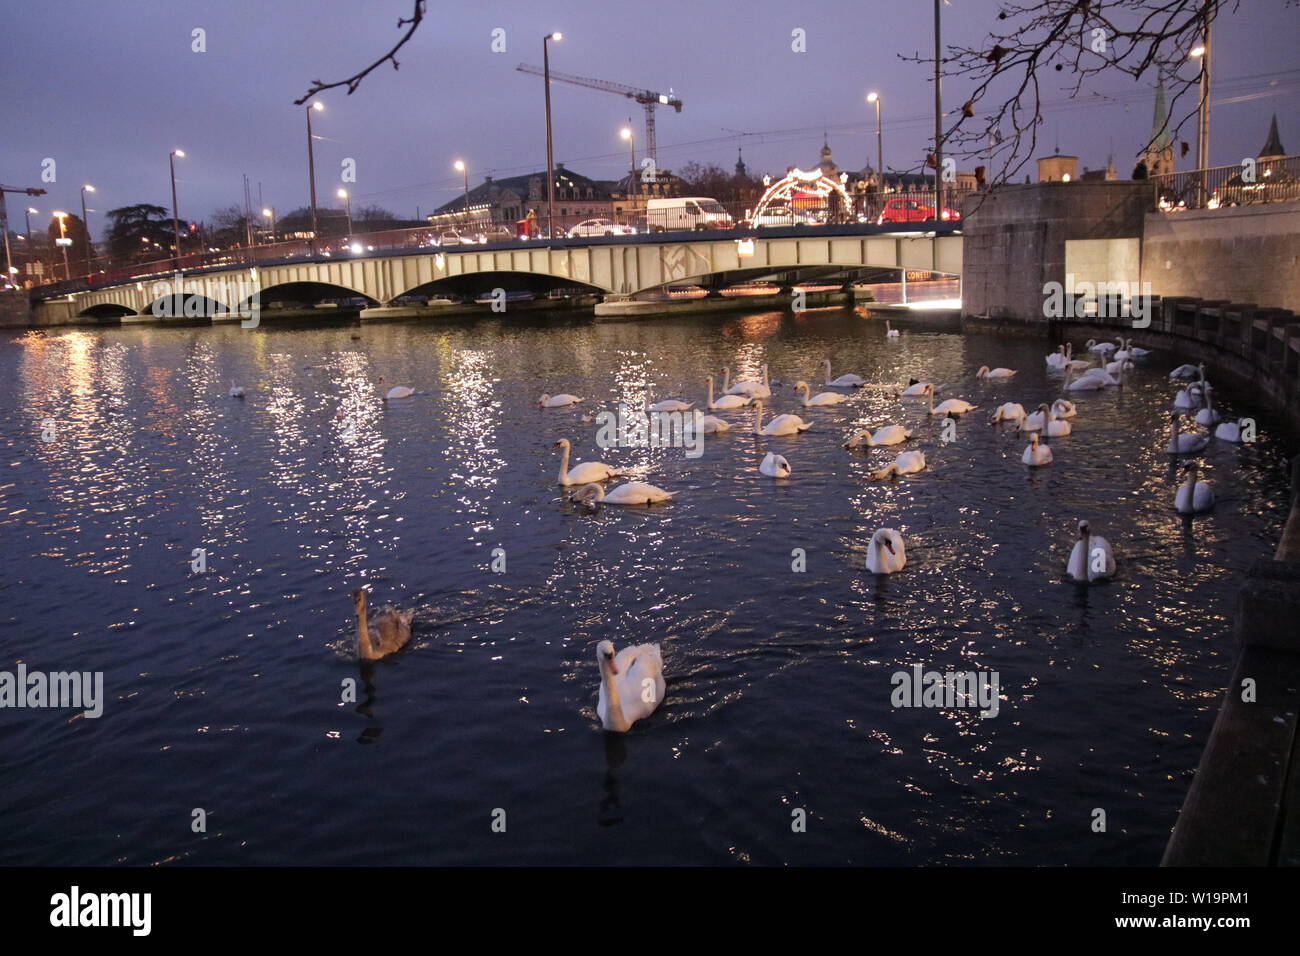 swans in Zurich at night Stock Photo